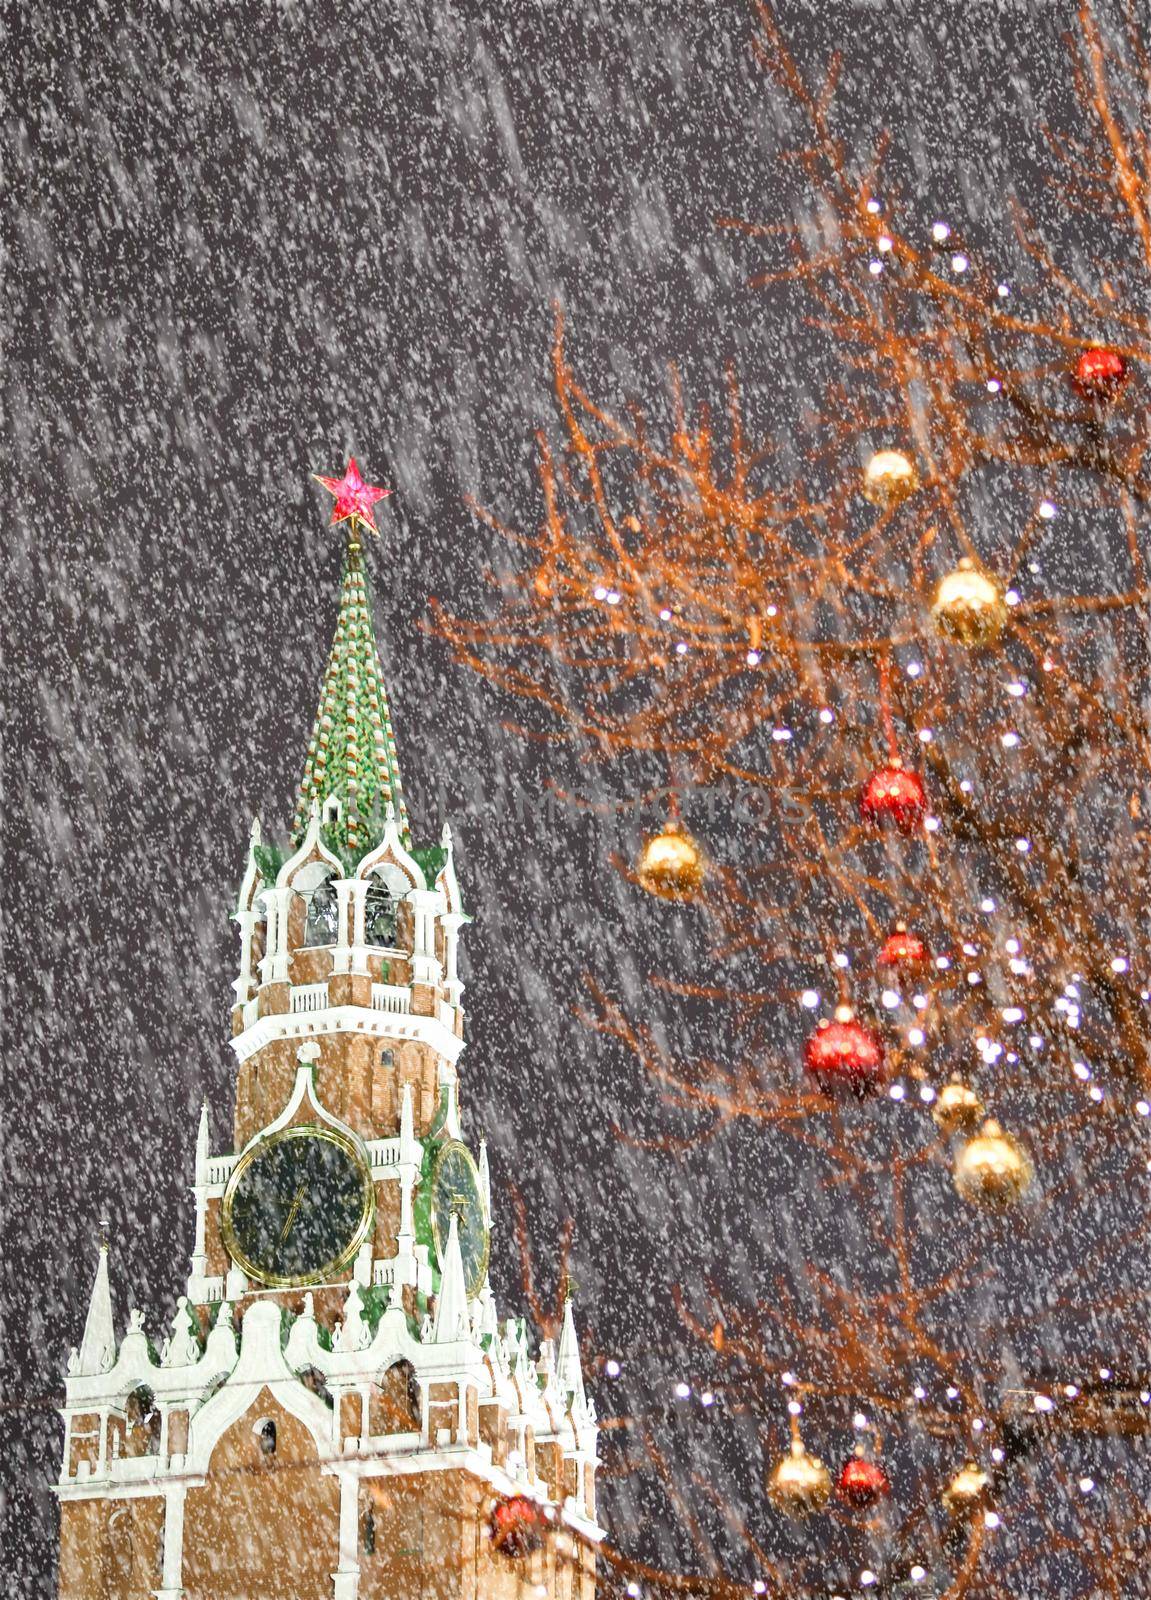 Spasskaya Tower on Red square in Moscow, Russia on Christmas